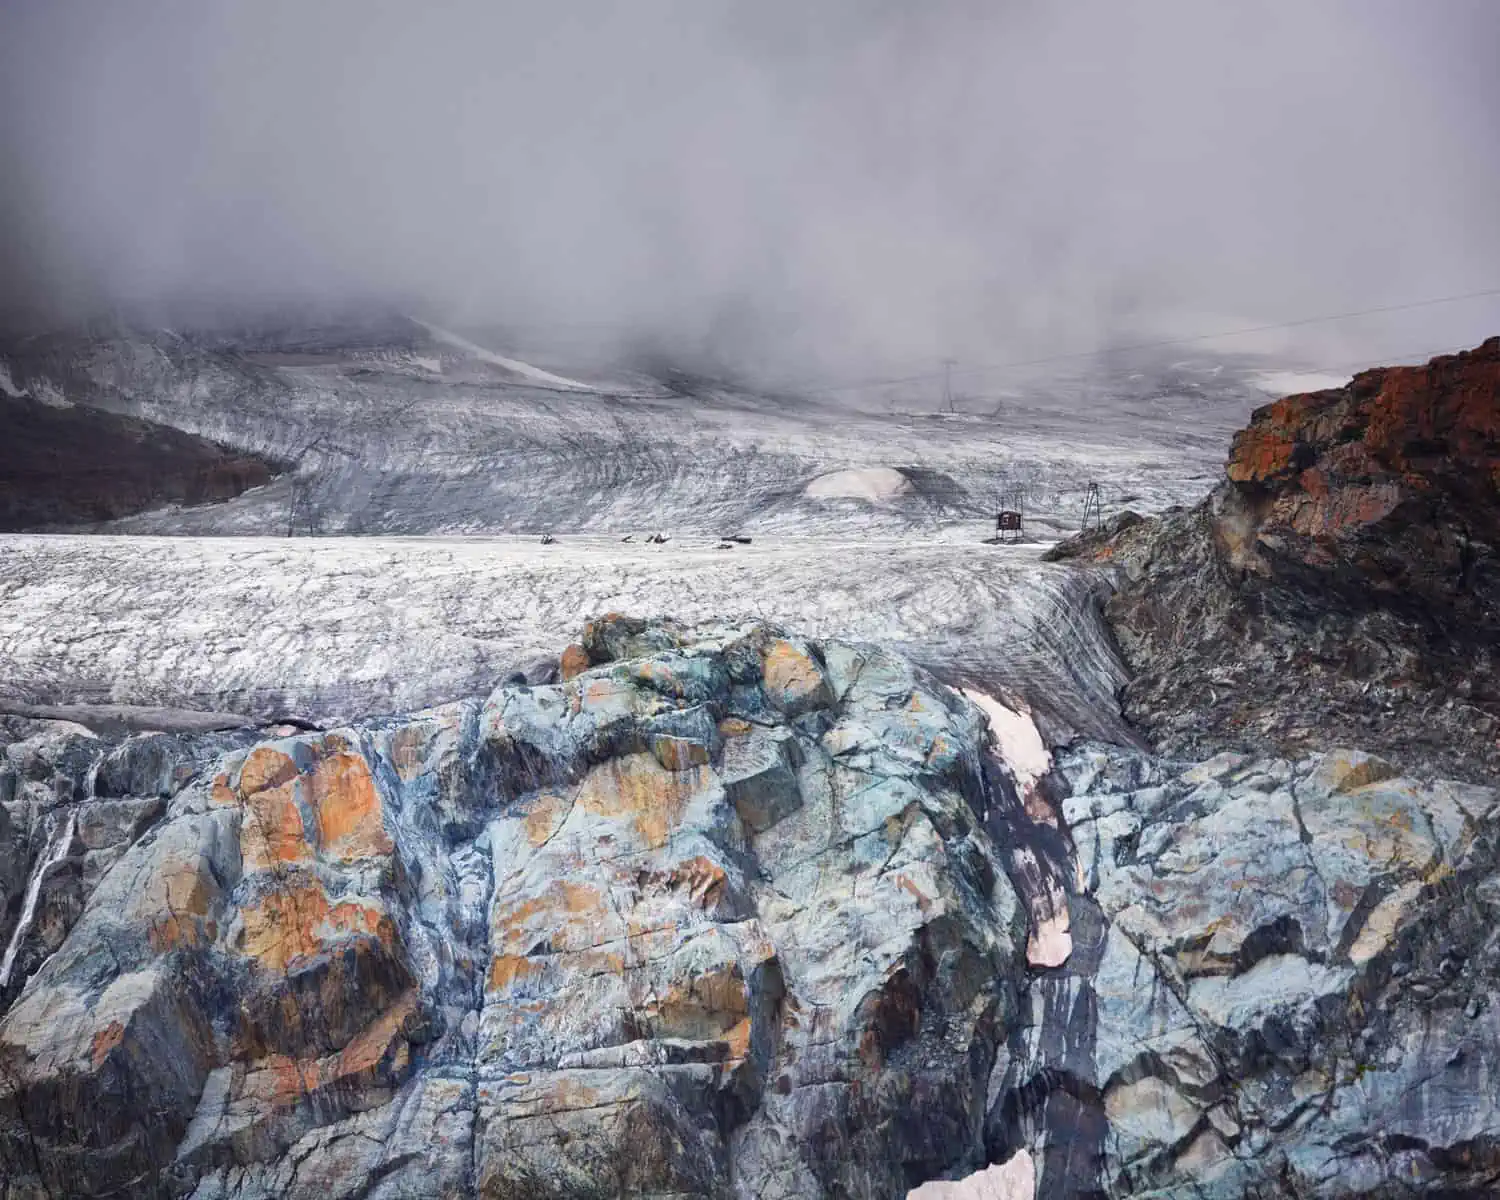 Image Description: A landscape format image. A glacier is in the foreground. It is mostly blue ice, but there are also yellow patches of lichen. In the background we see an ice filed, hardware for ski lifts and thick clouds at the top of the frame.